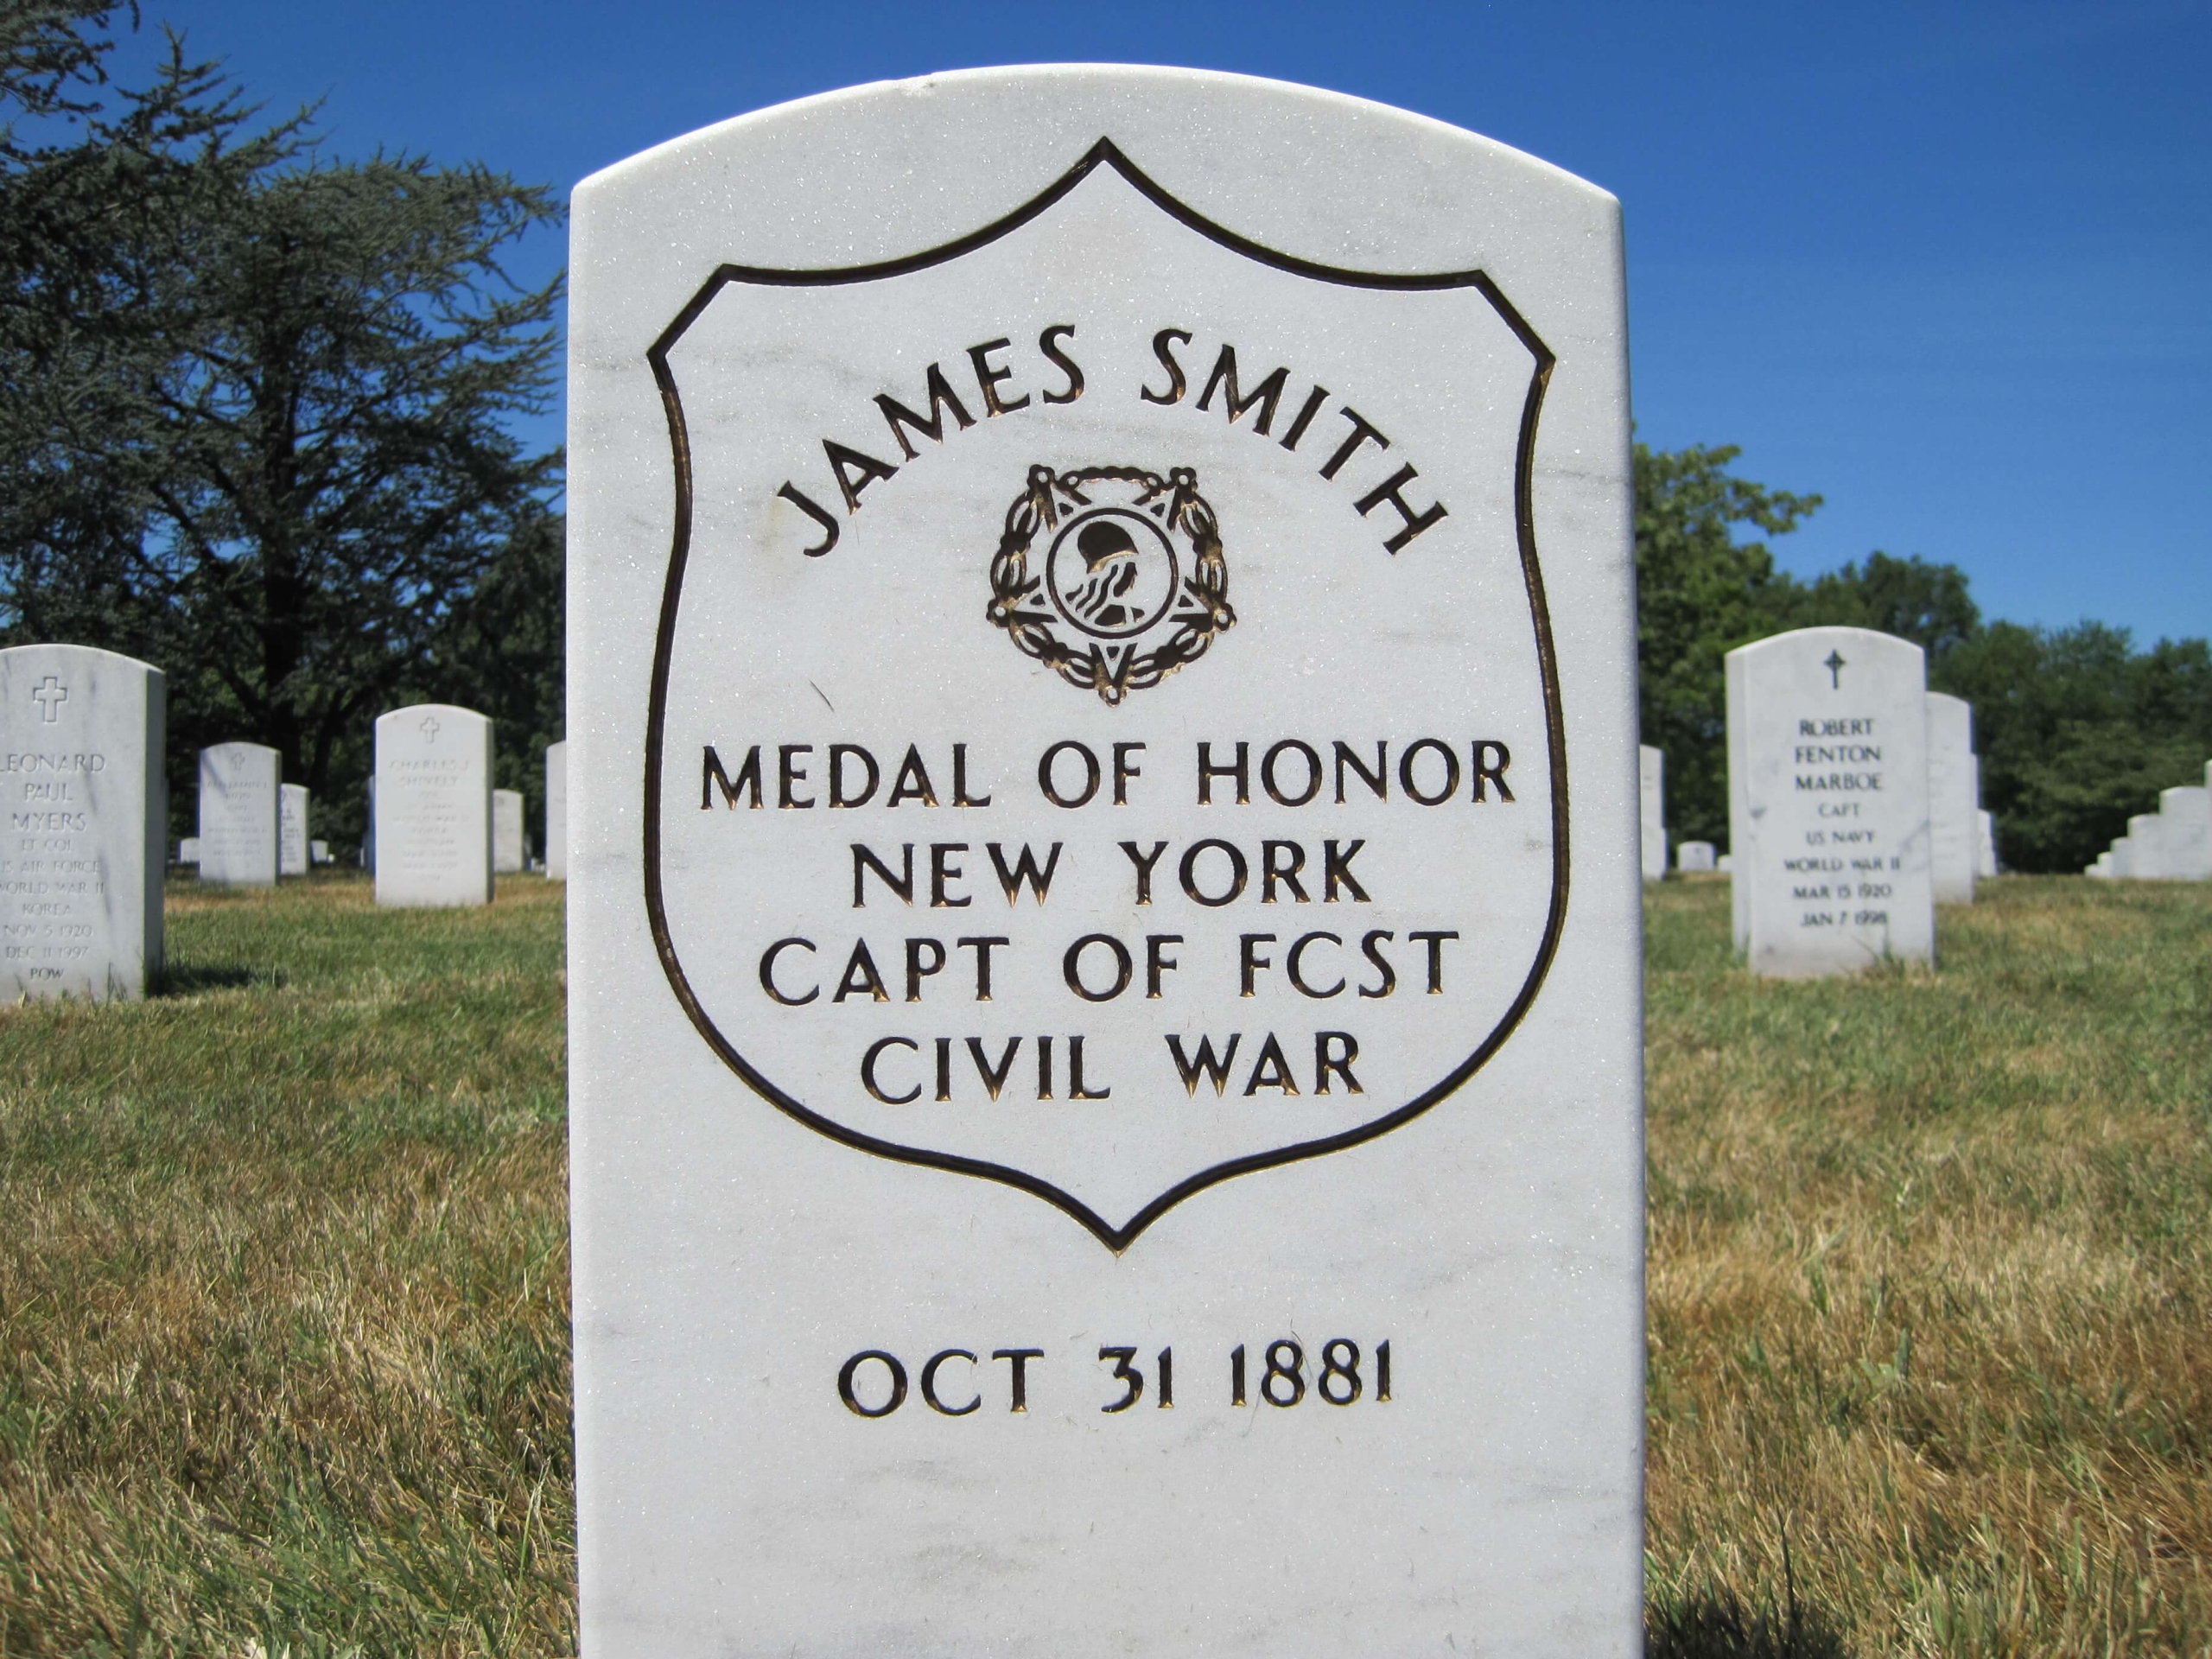 james-smith-gravesite-photo-by-eileen-horan-july-2010-001